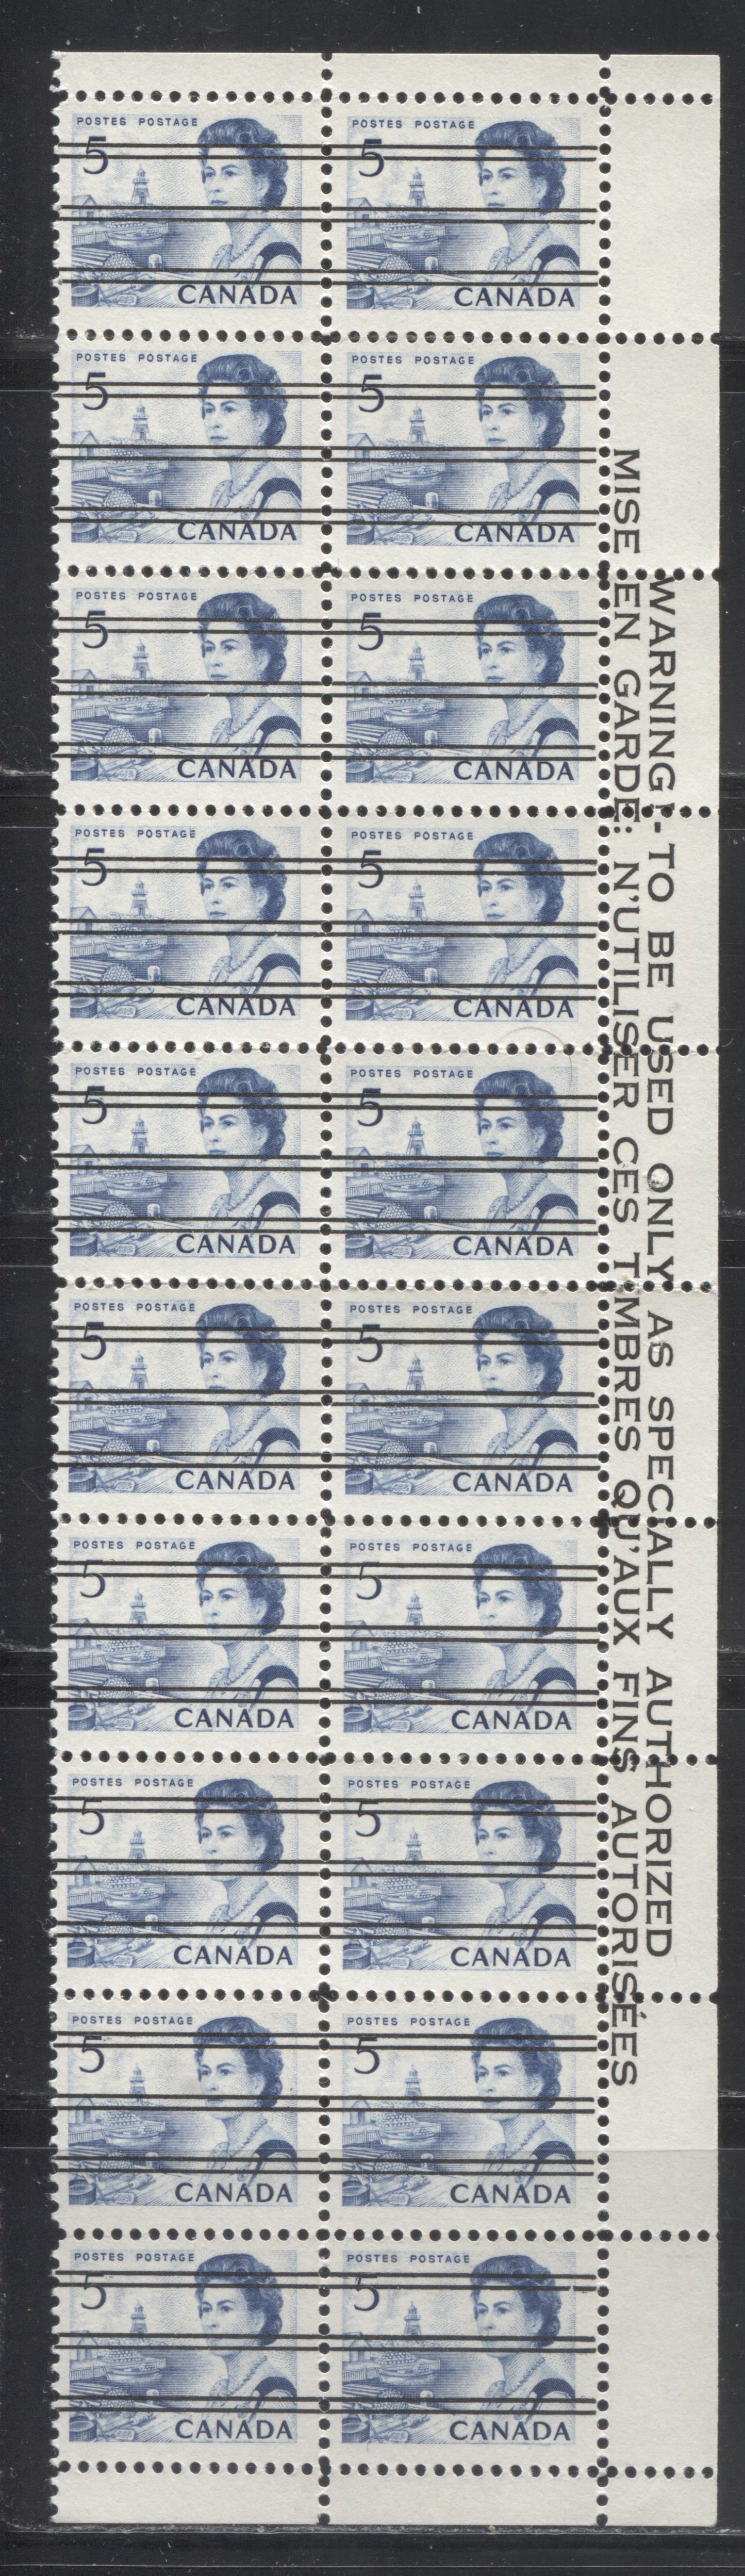 Lot 248 Canada #458xx 5c Dark Blue, Atlantic Fishing Village, 1967-1973 Centennial Issue, A Fine Precancelled Warning Strip of 20 From the Right Side of the Pane, DF Greyish Paper, Streaky Dex